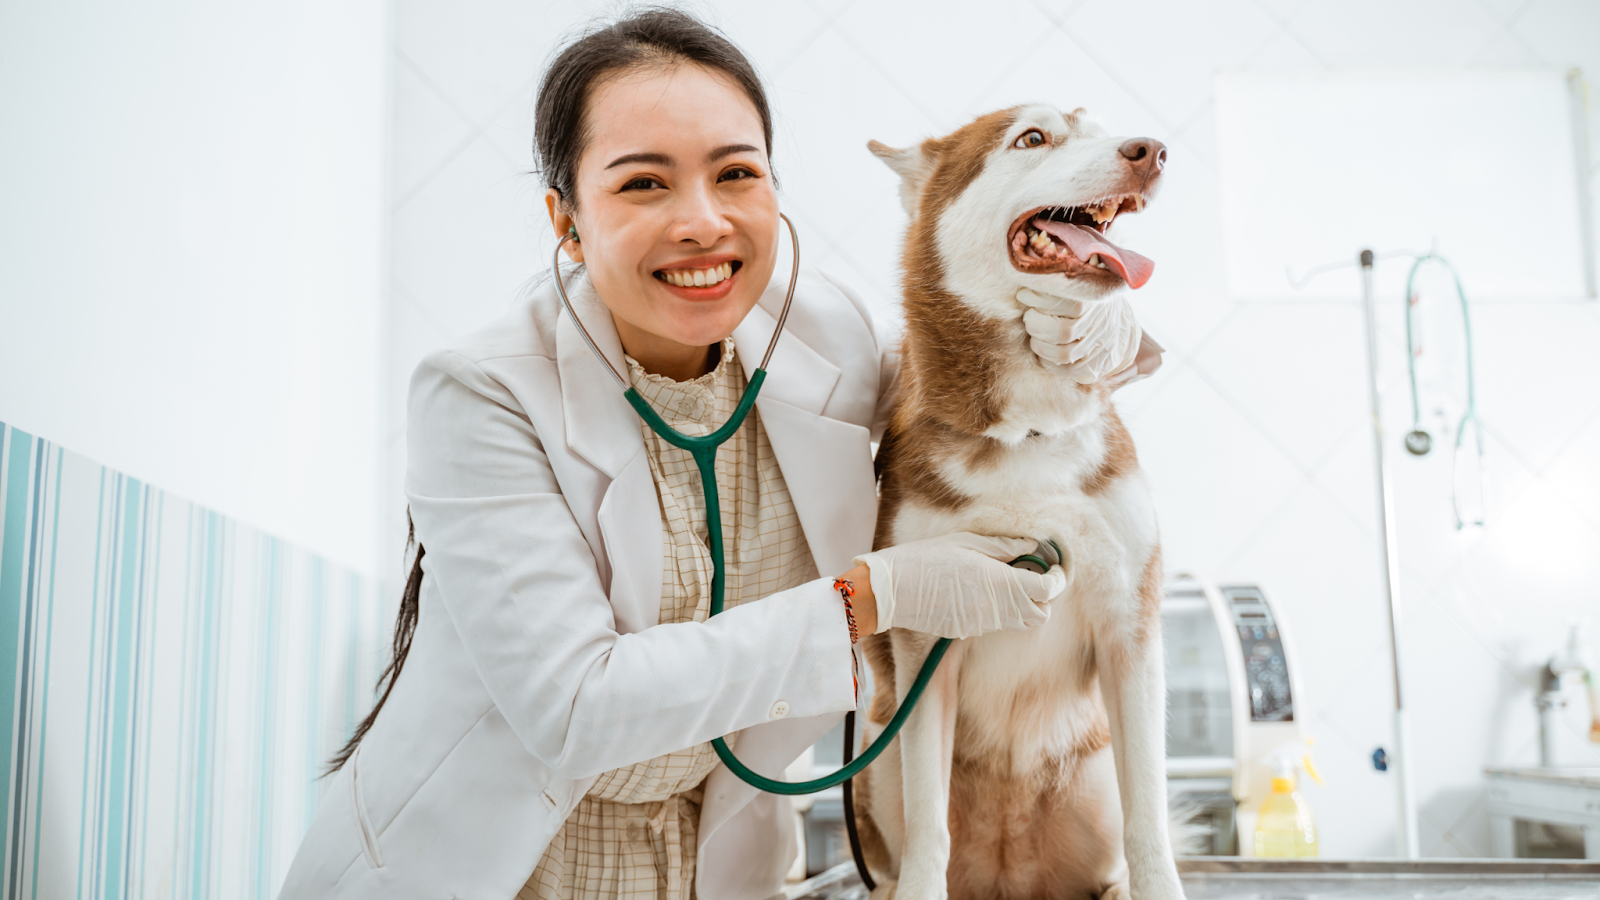 The Bordatella vaccine can help protect your dog against kennel cough.